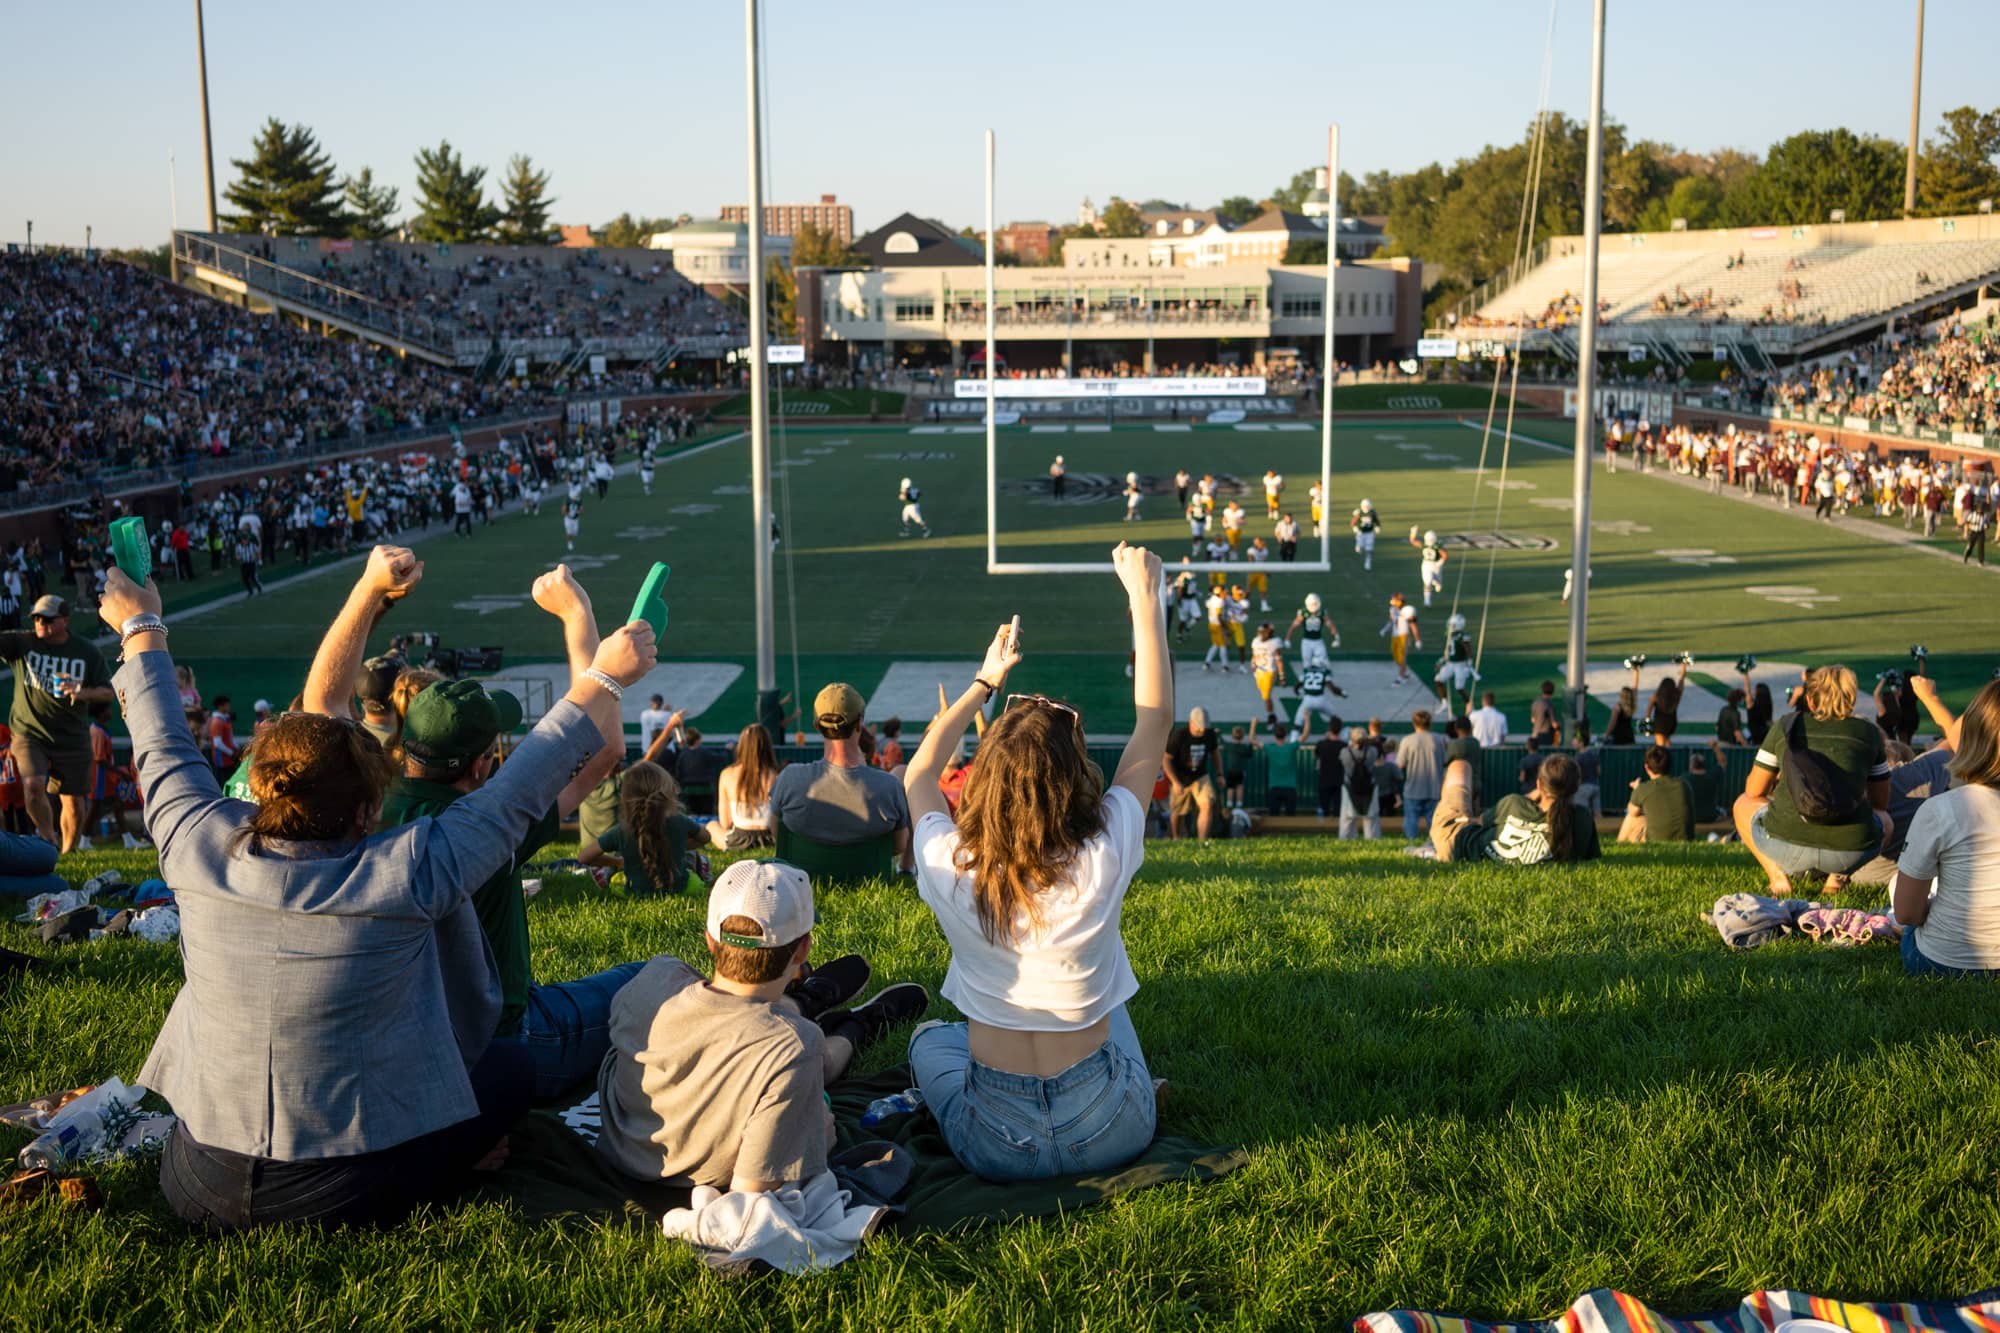 Fans celebrate a play at the Homecoming Football games.